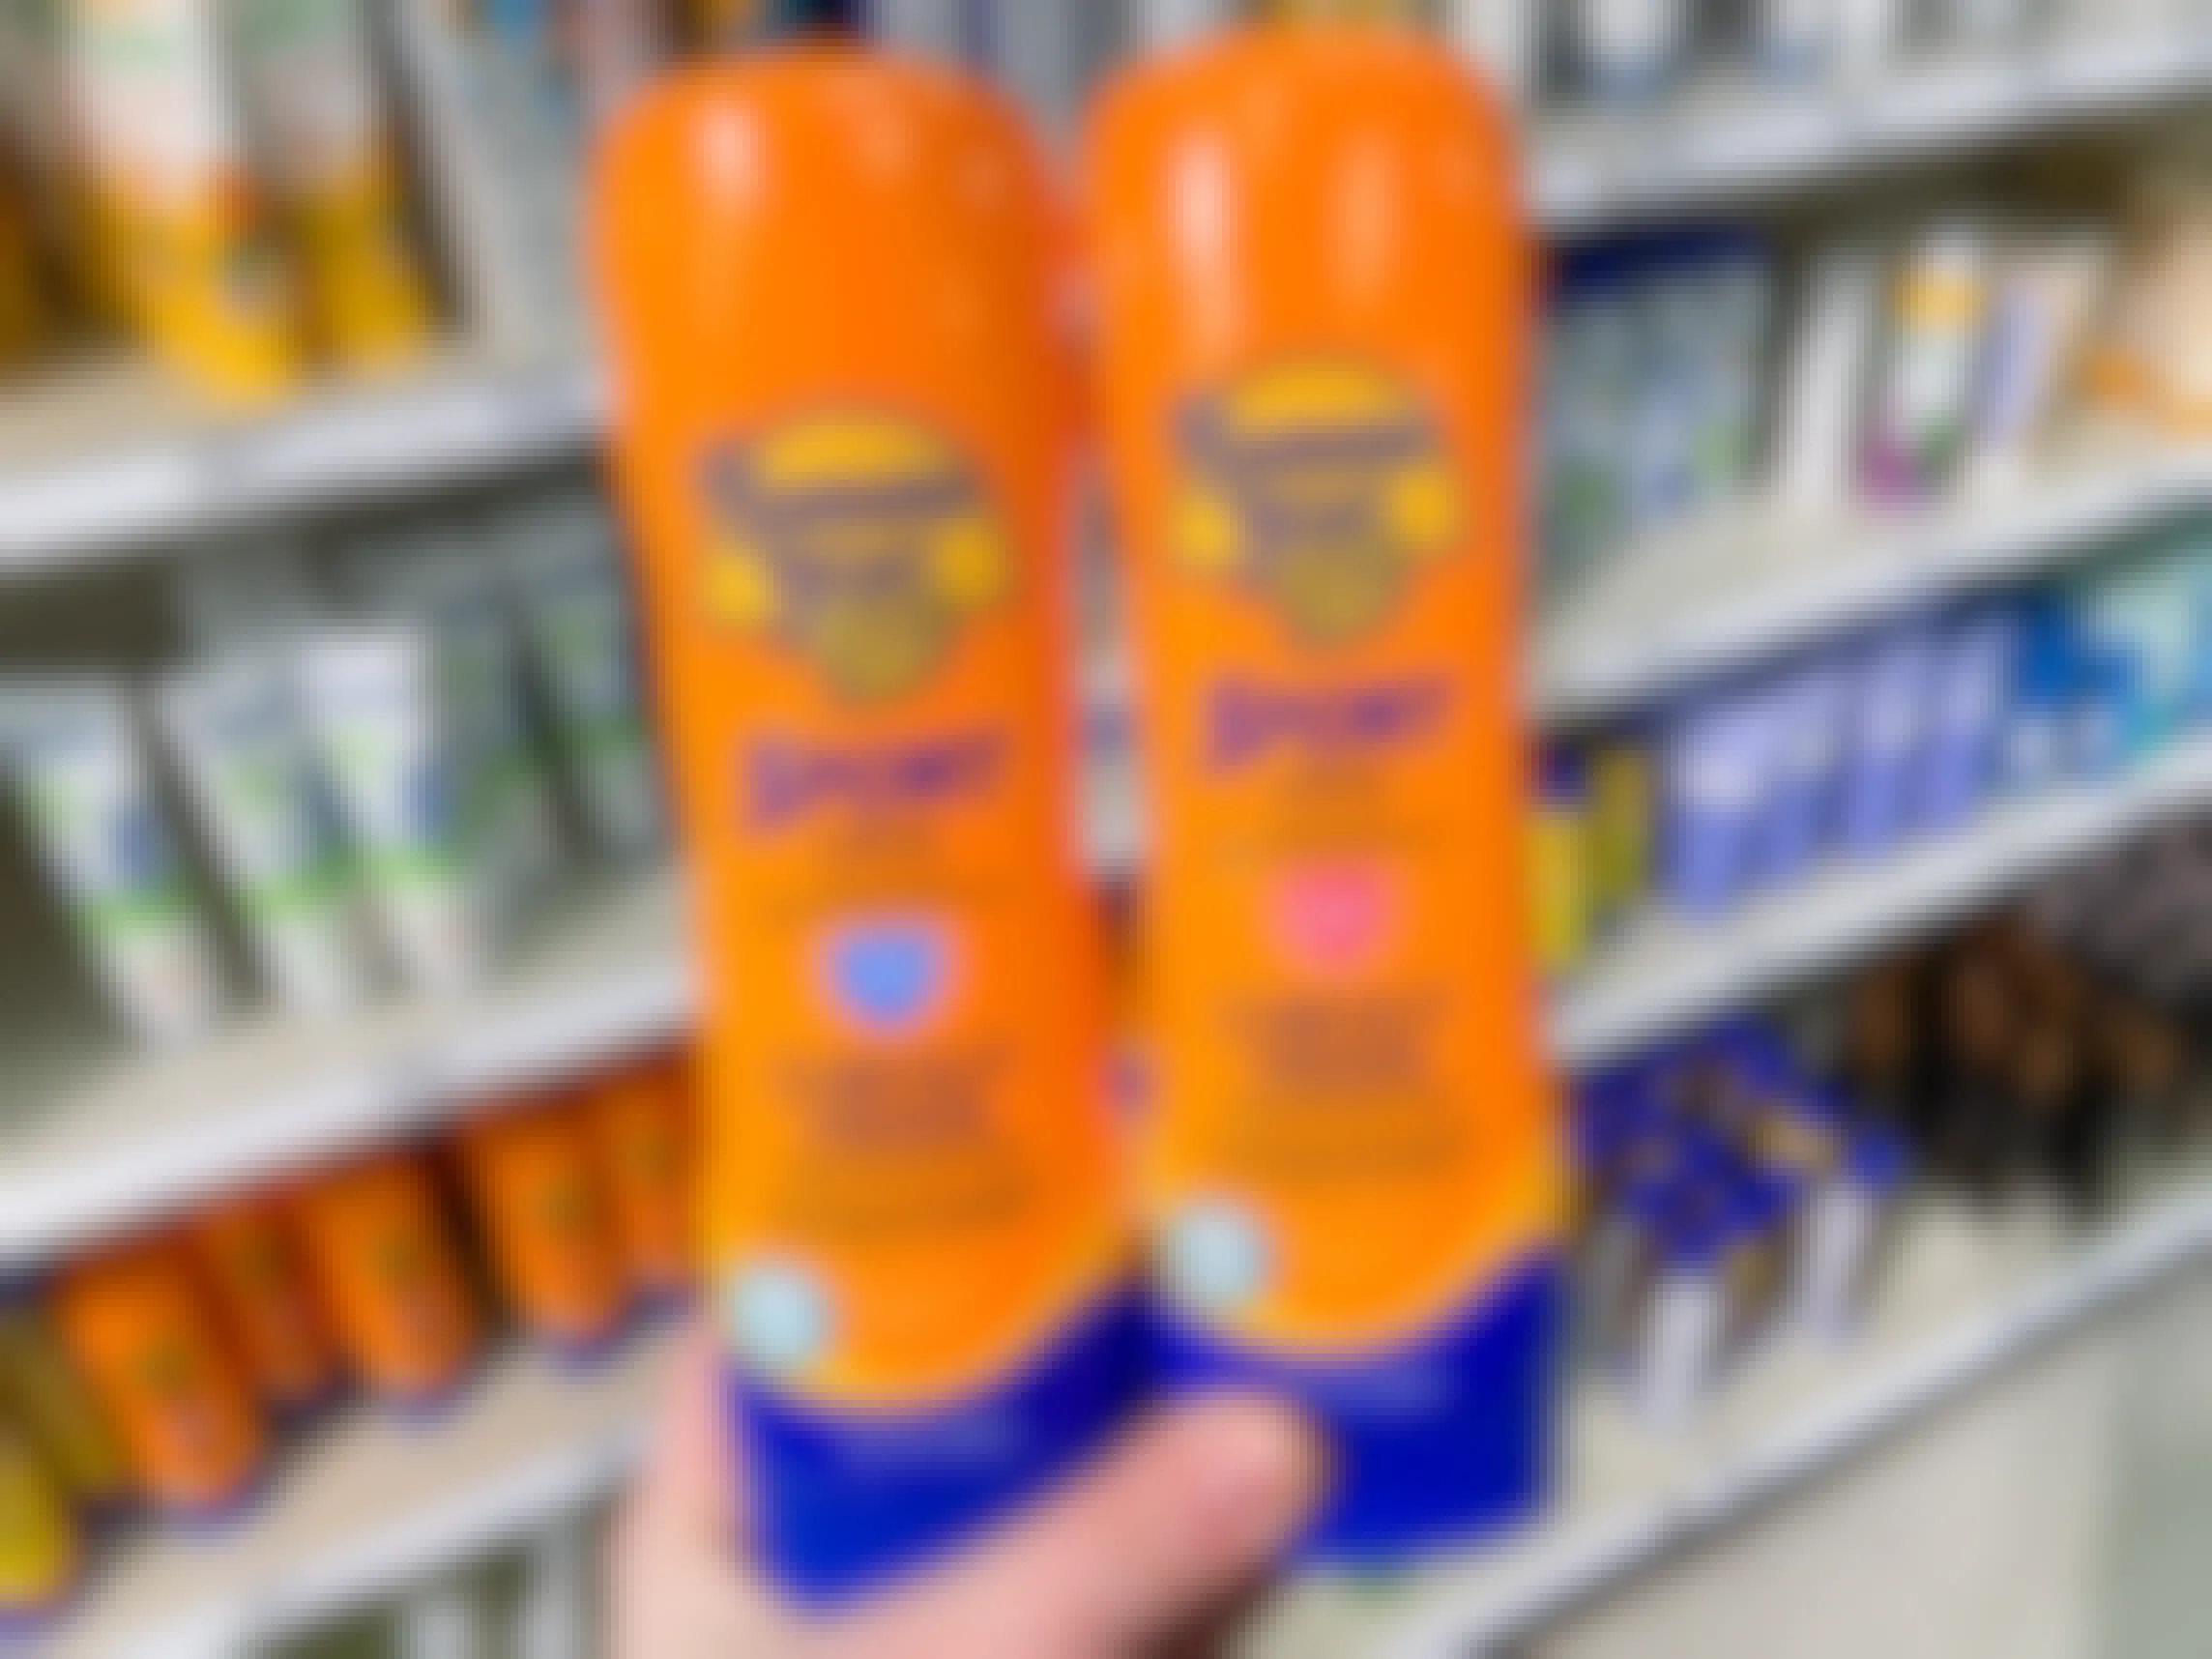 hand holding two bottles of banana boat sunscreen lotion